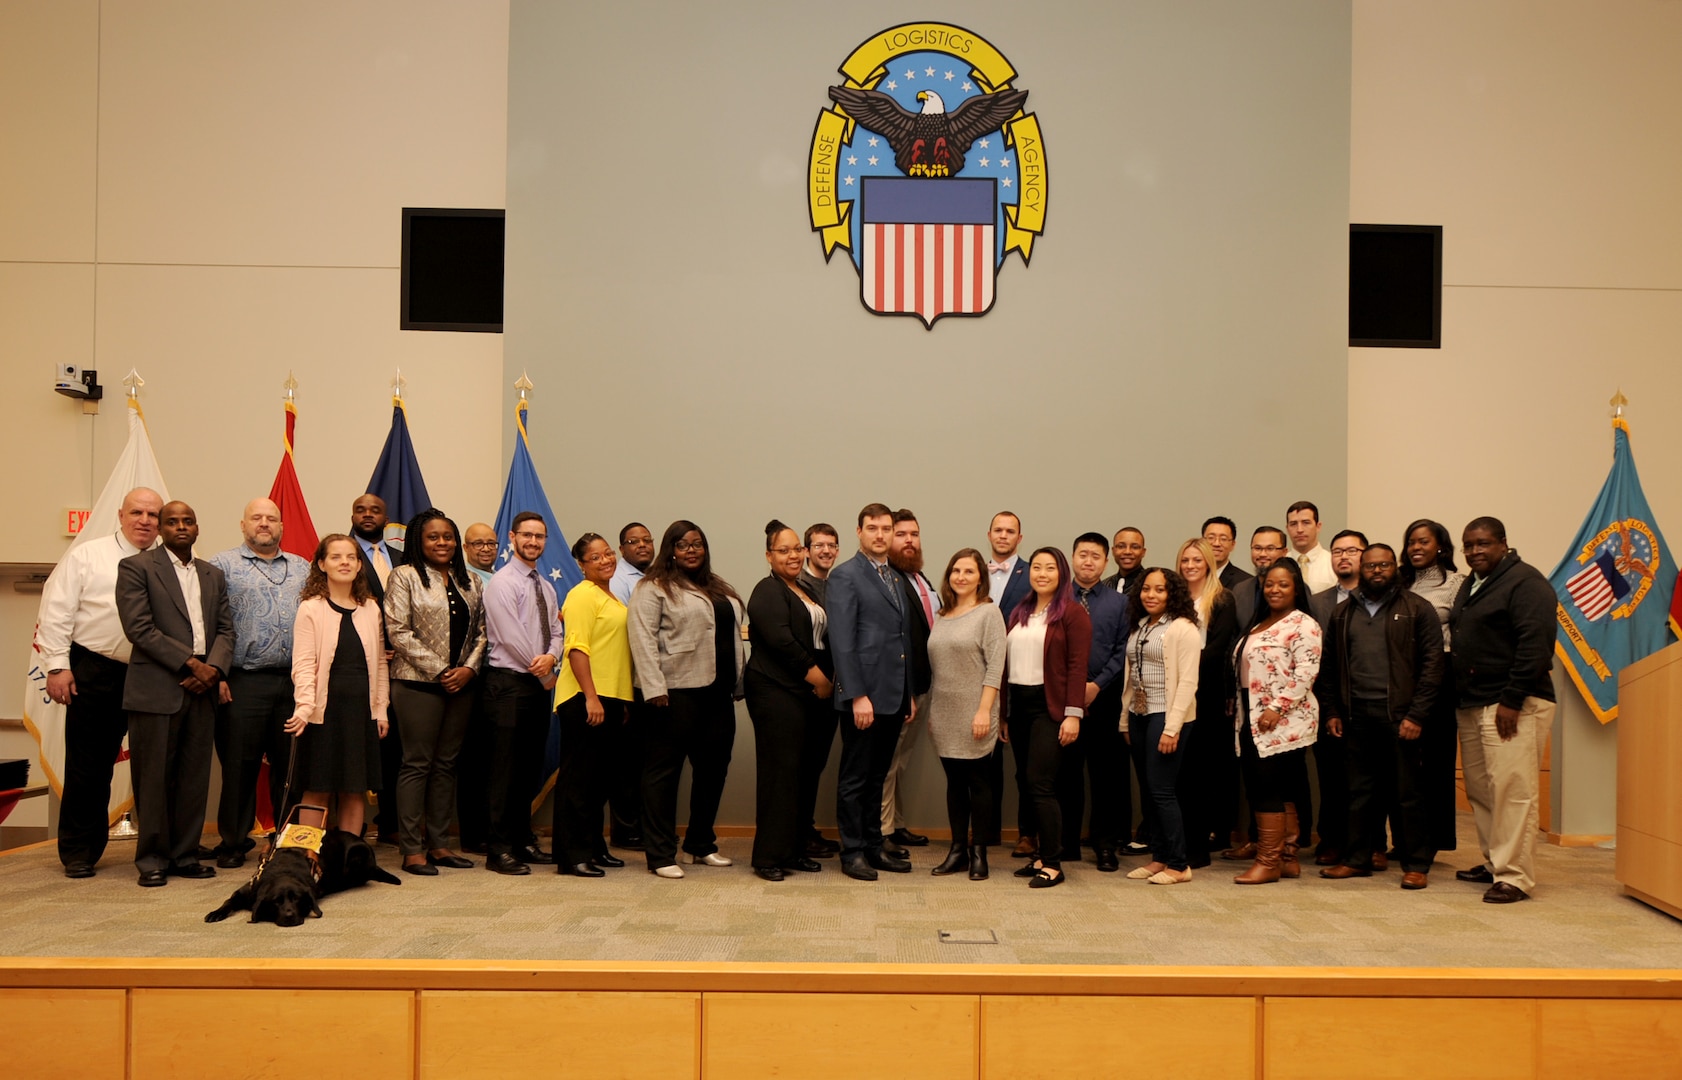 DLA Pathways to Career Excellence Program participants were honored during a graduation ceremony Oct. 31, 2018 at DLA Troop Support in Philadelphia. Graduates from DLA Aviation Philadelphia and the DLA Contracting Services Office were also honored.